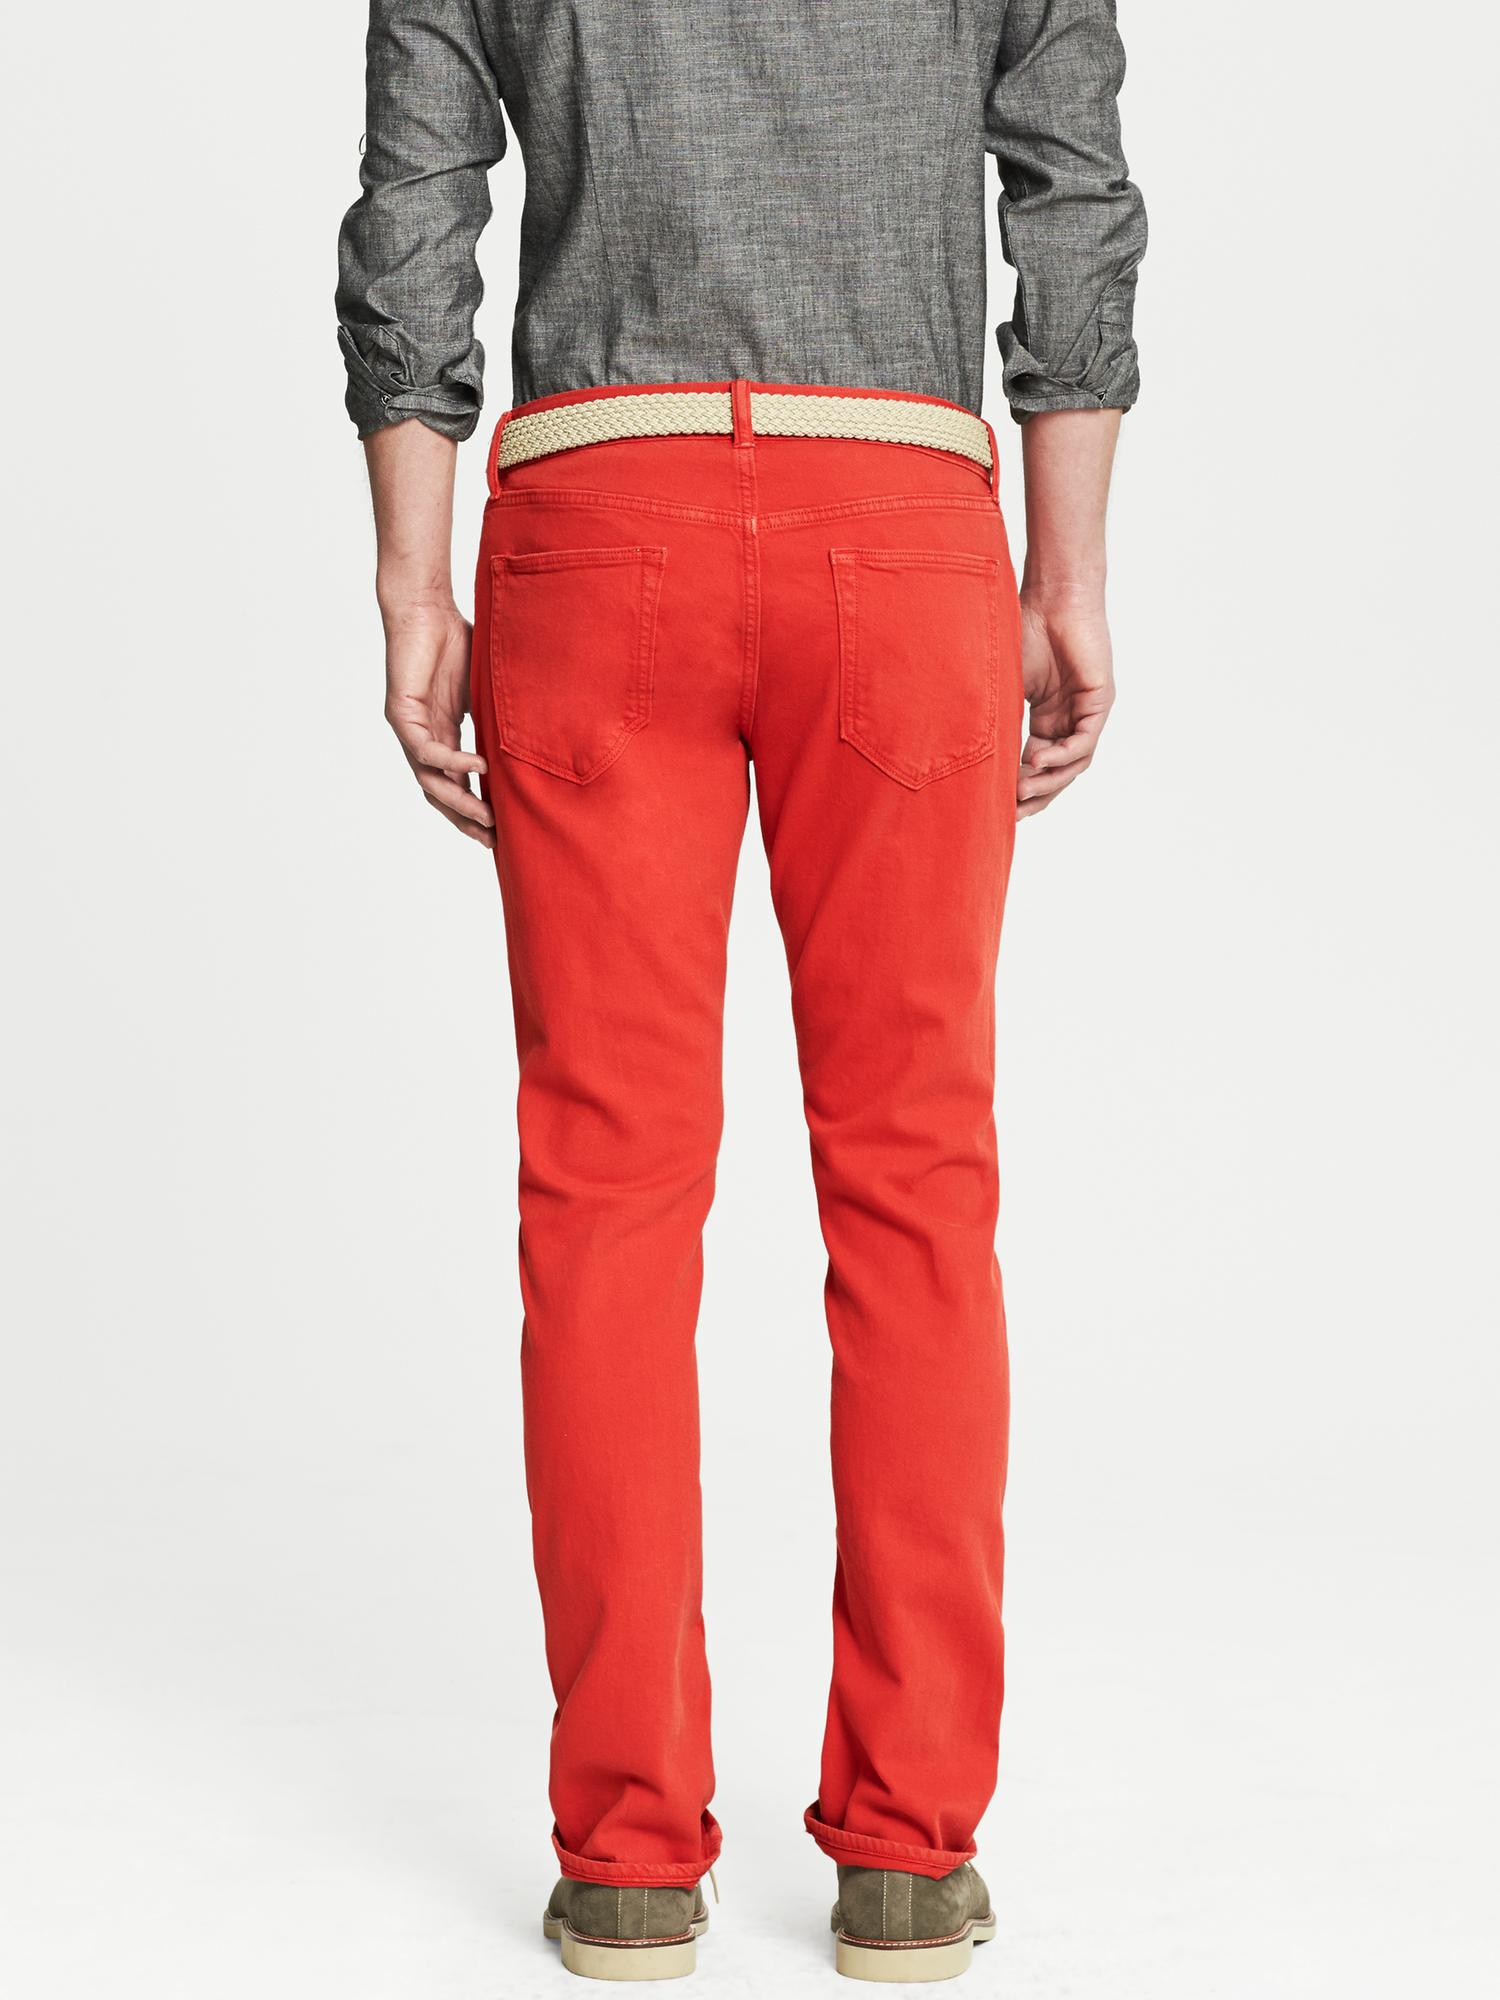 Banana Republic Vintage Straight-Fit Five-Pocket Pant in Red for Men - Lyst